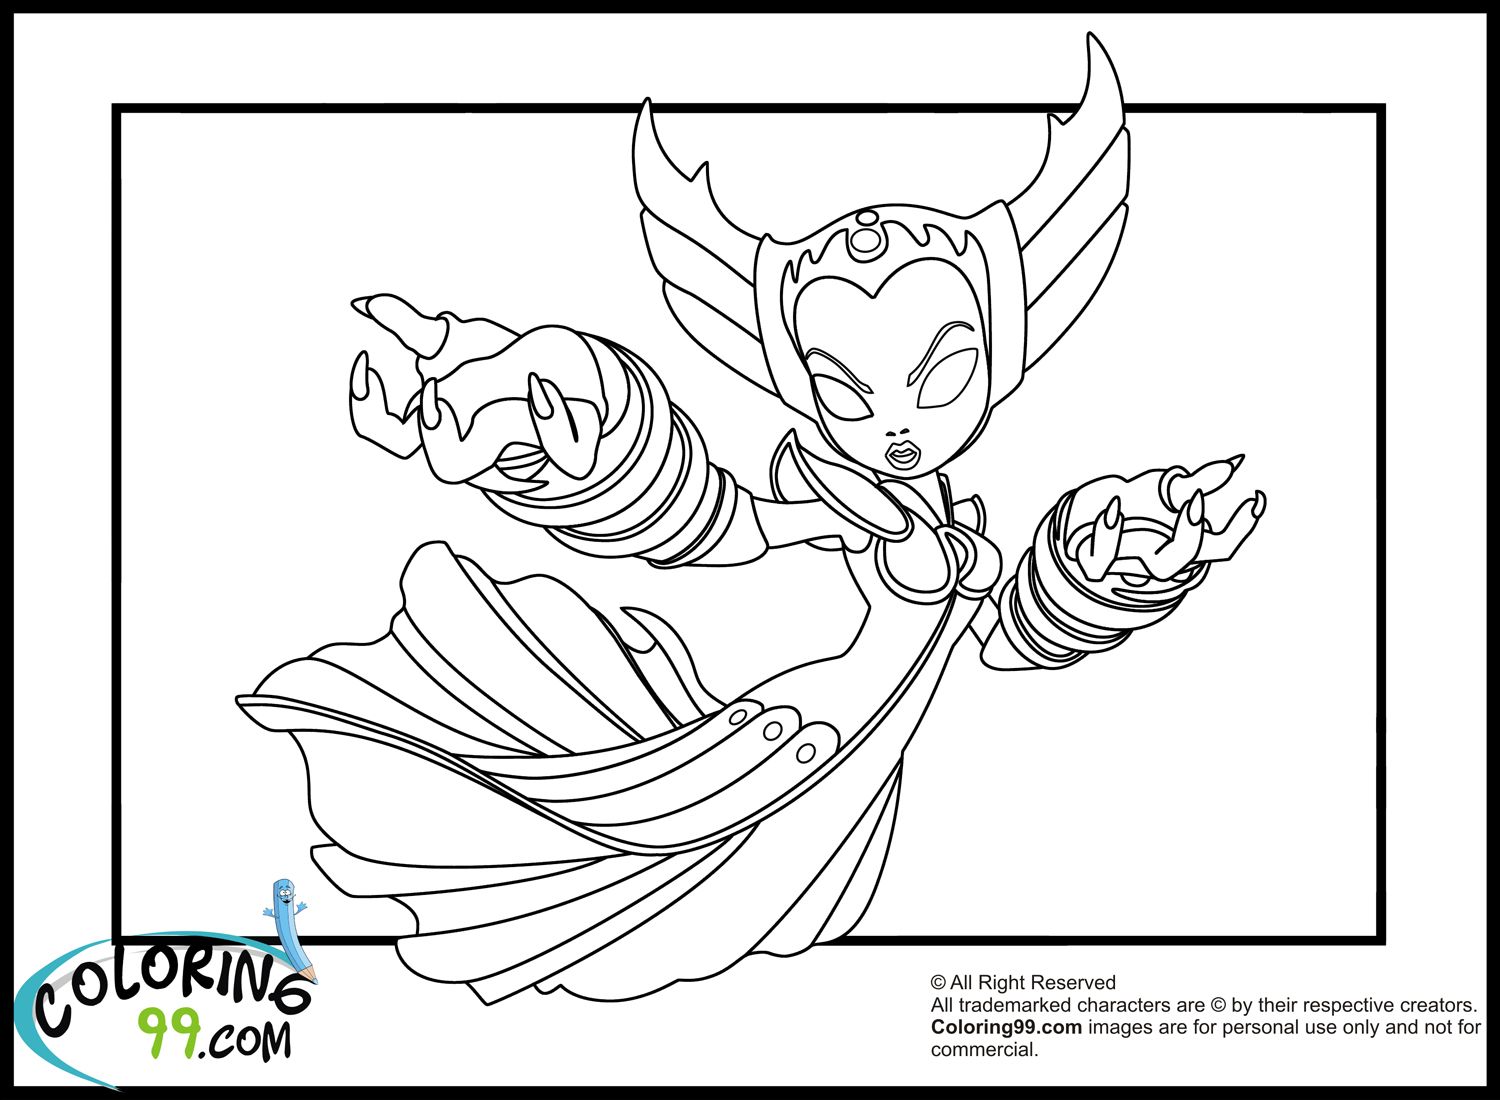 Skylanders Elves Coloring Pages | Minister Coloring